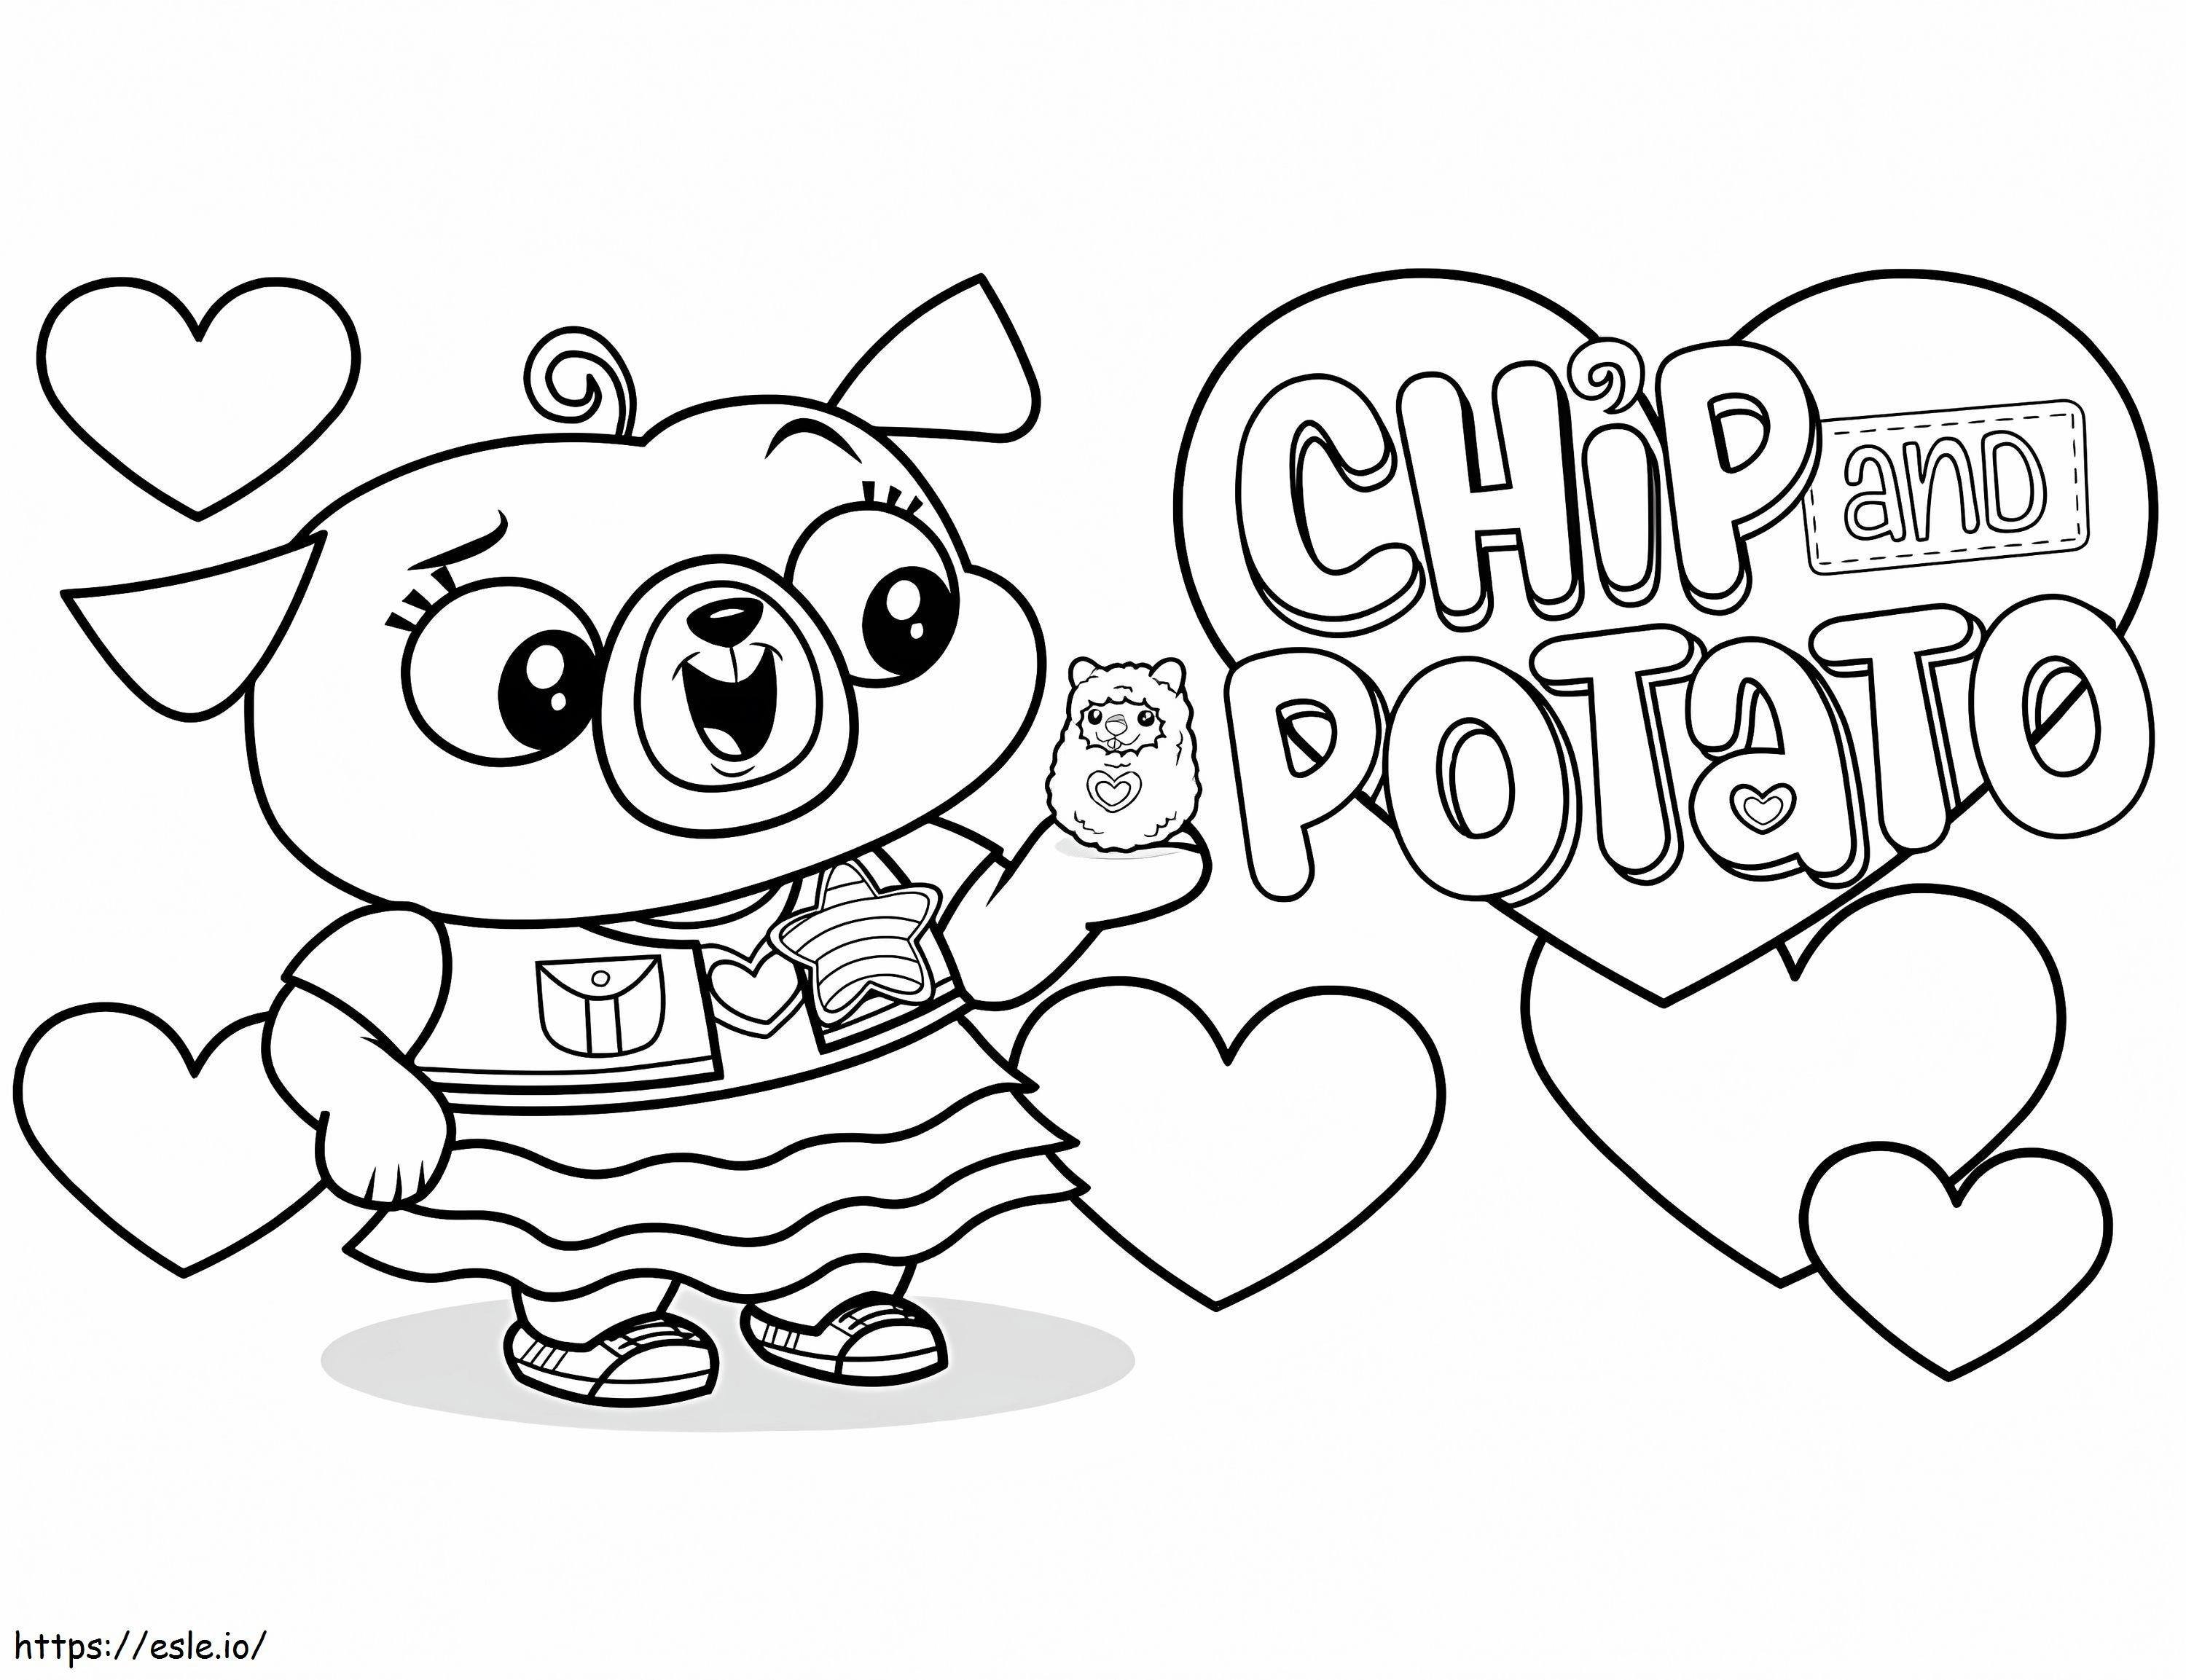 Adorable Chip And Potato coloring page